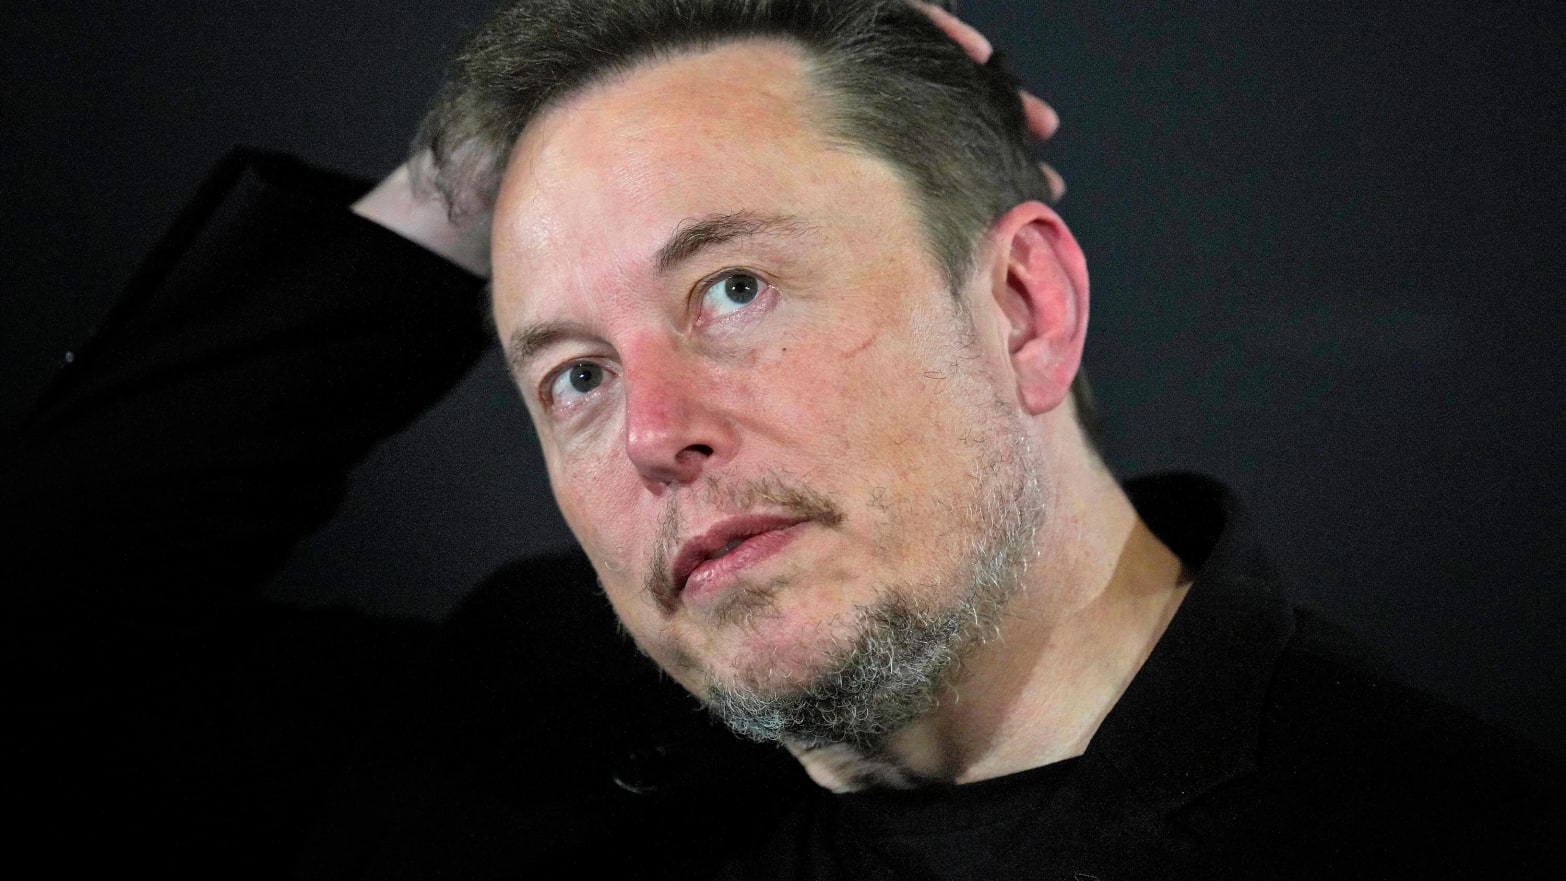 A close up of Elon Musk with his hand on his head